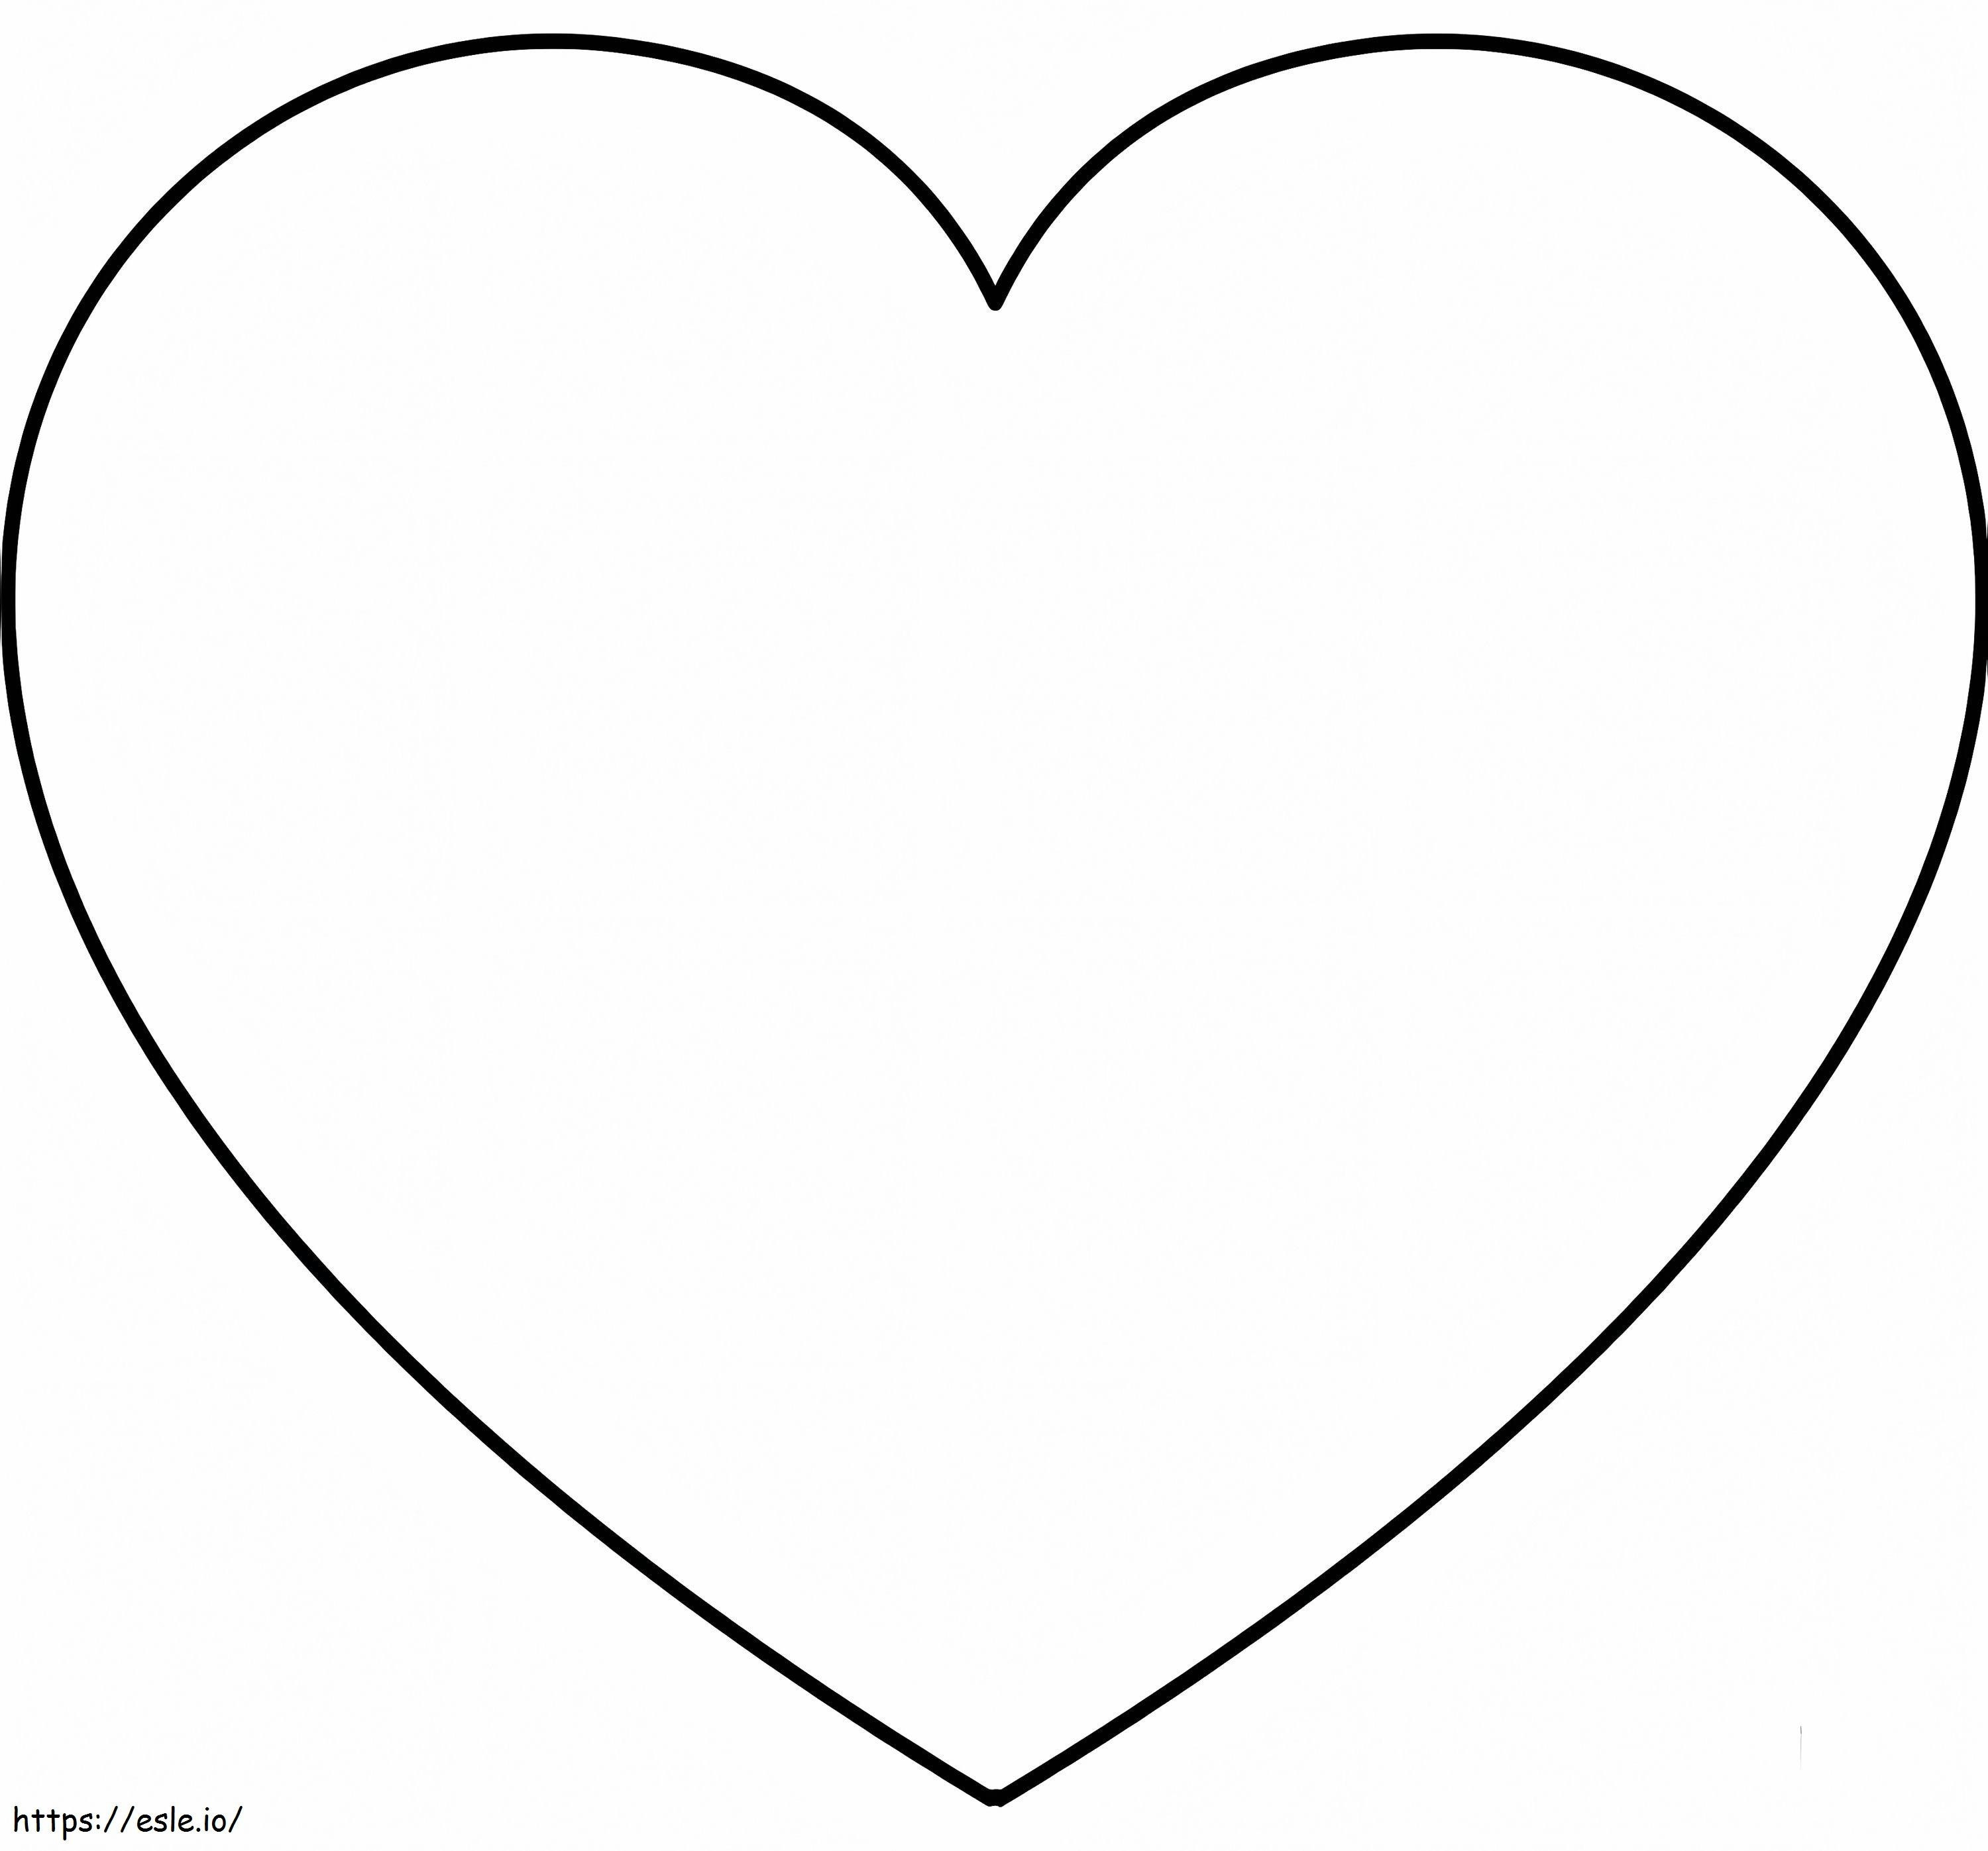 A Heart coloring page